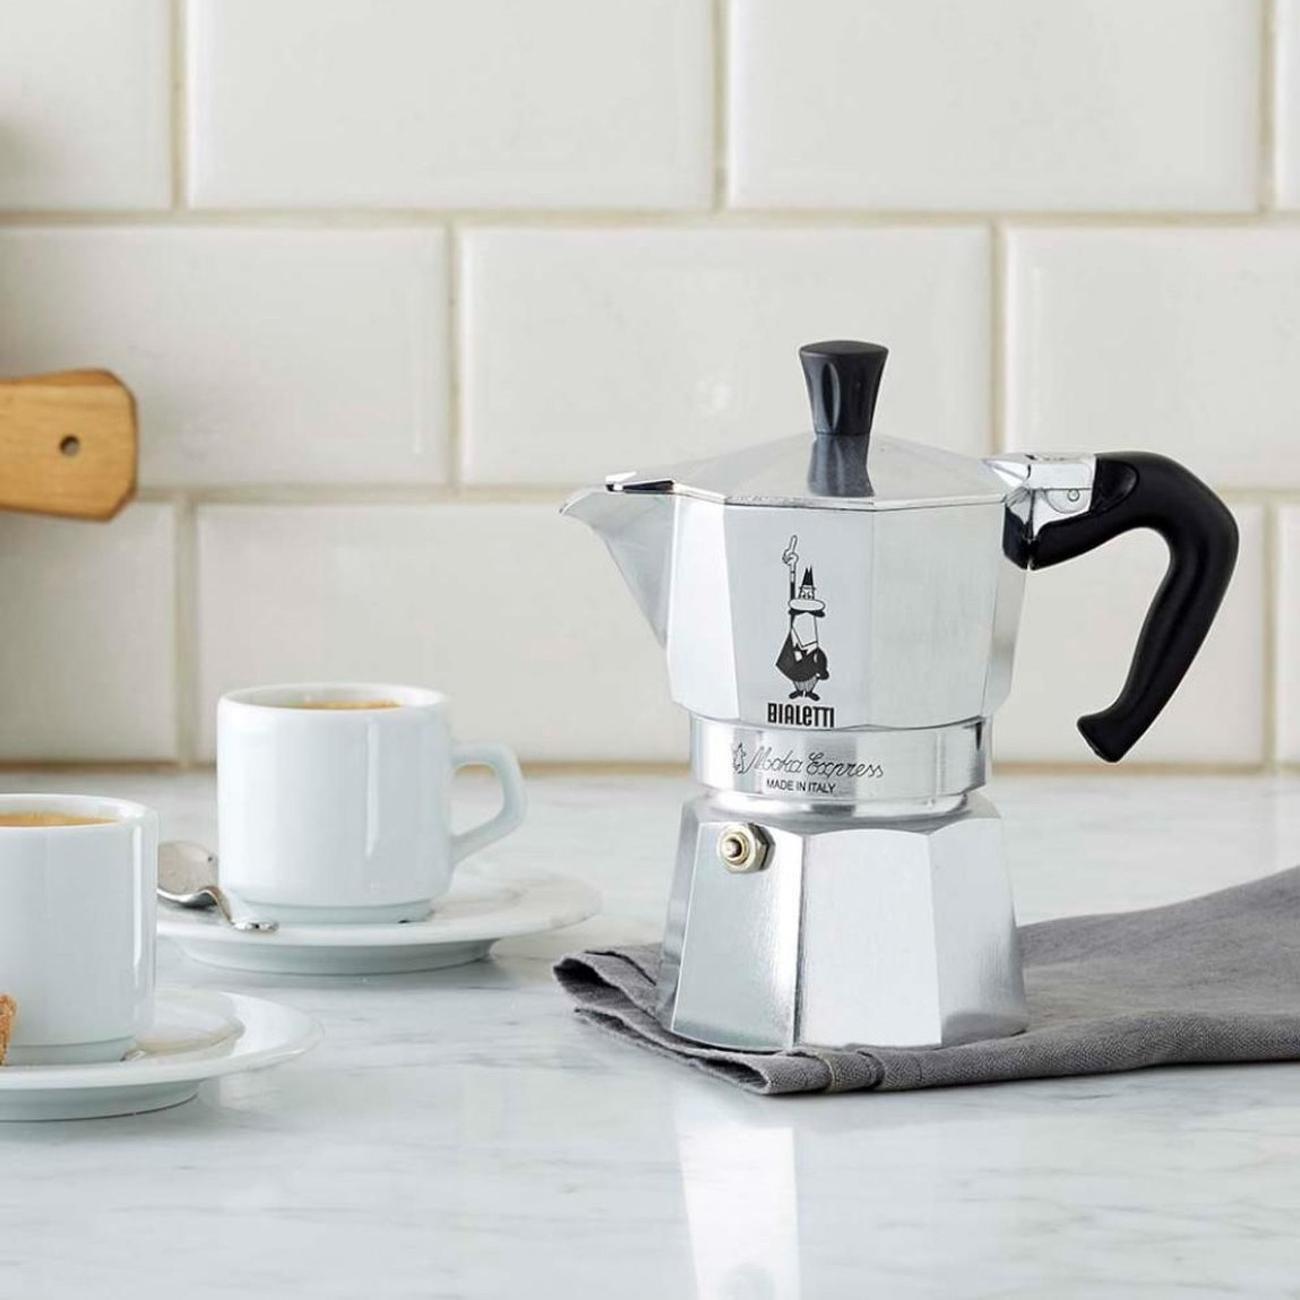 https://www.thekitchenwhisk.ie/contentfiles/productImages/Large/Moka2cup3.jpg